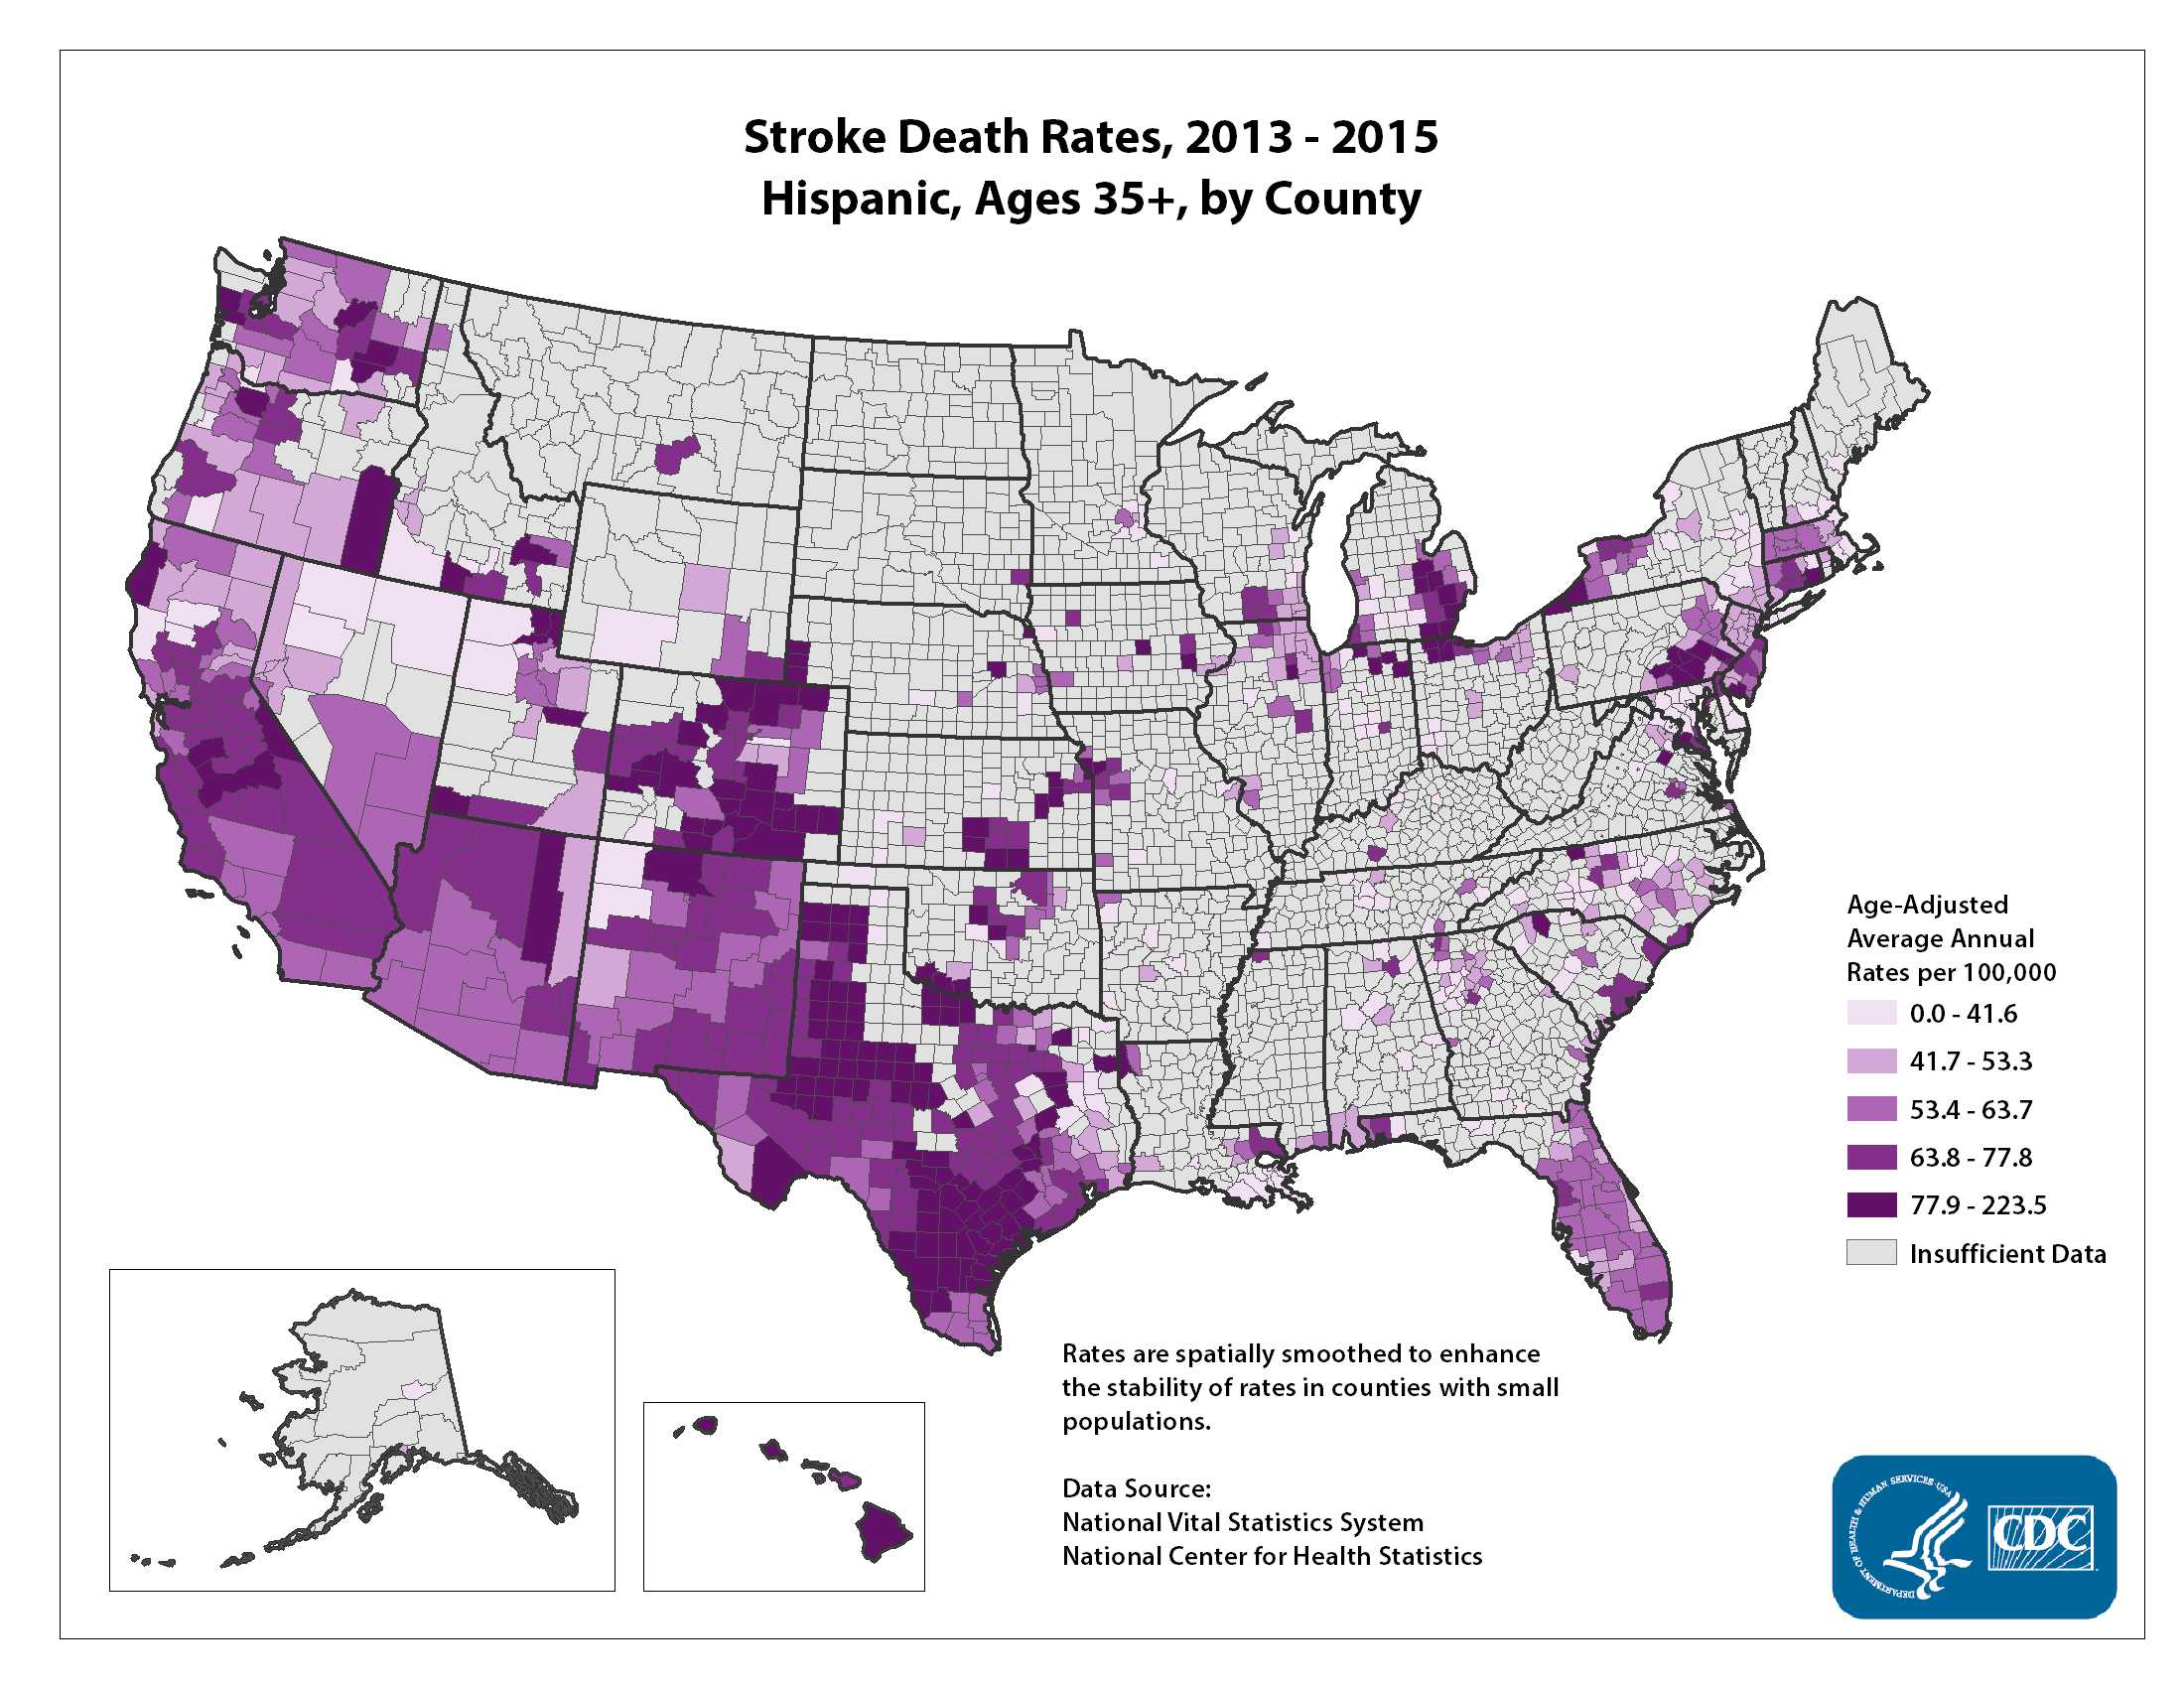 Stroke Death Rates for 2012 through 2014 for Hispanics Aged 35 Years and Older by County. The map shows that concentrations of counties with the highest stroke death rates - meaning the top quintile - are located primarily in Hawaii, Texas, and Colorado. Pockets of high-rate counties also are found in Oklahoma, California, and Indiana.